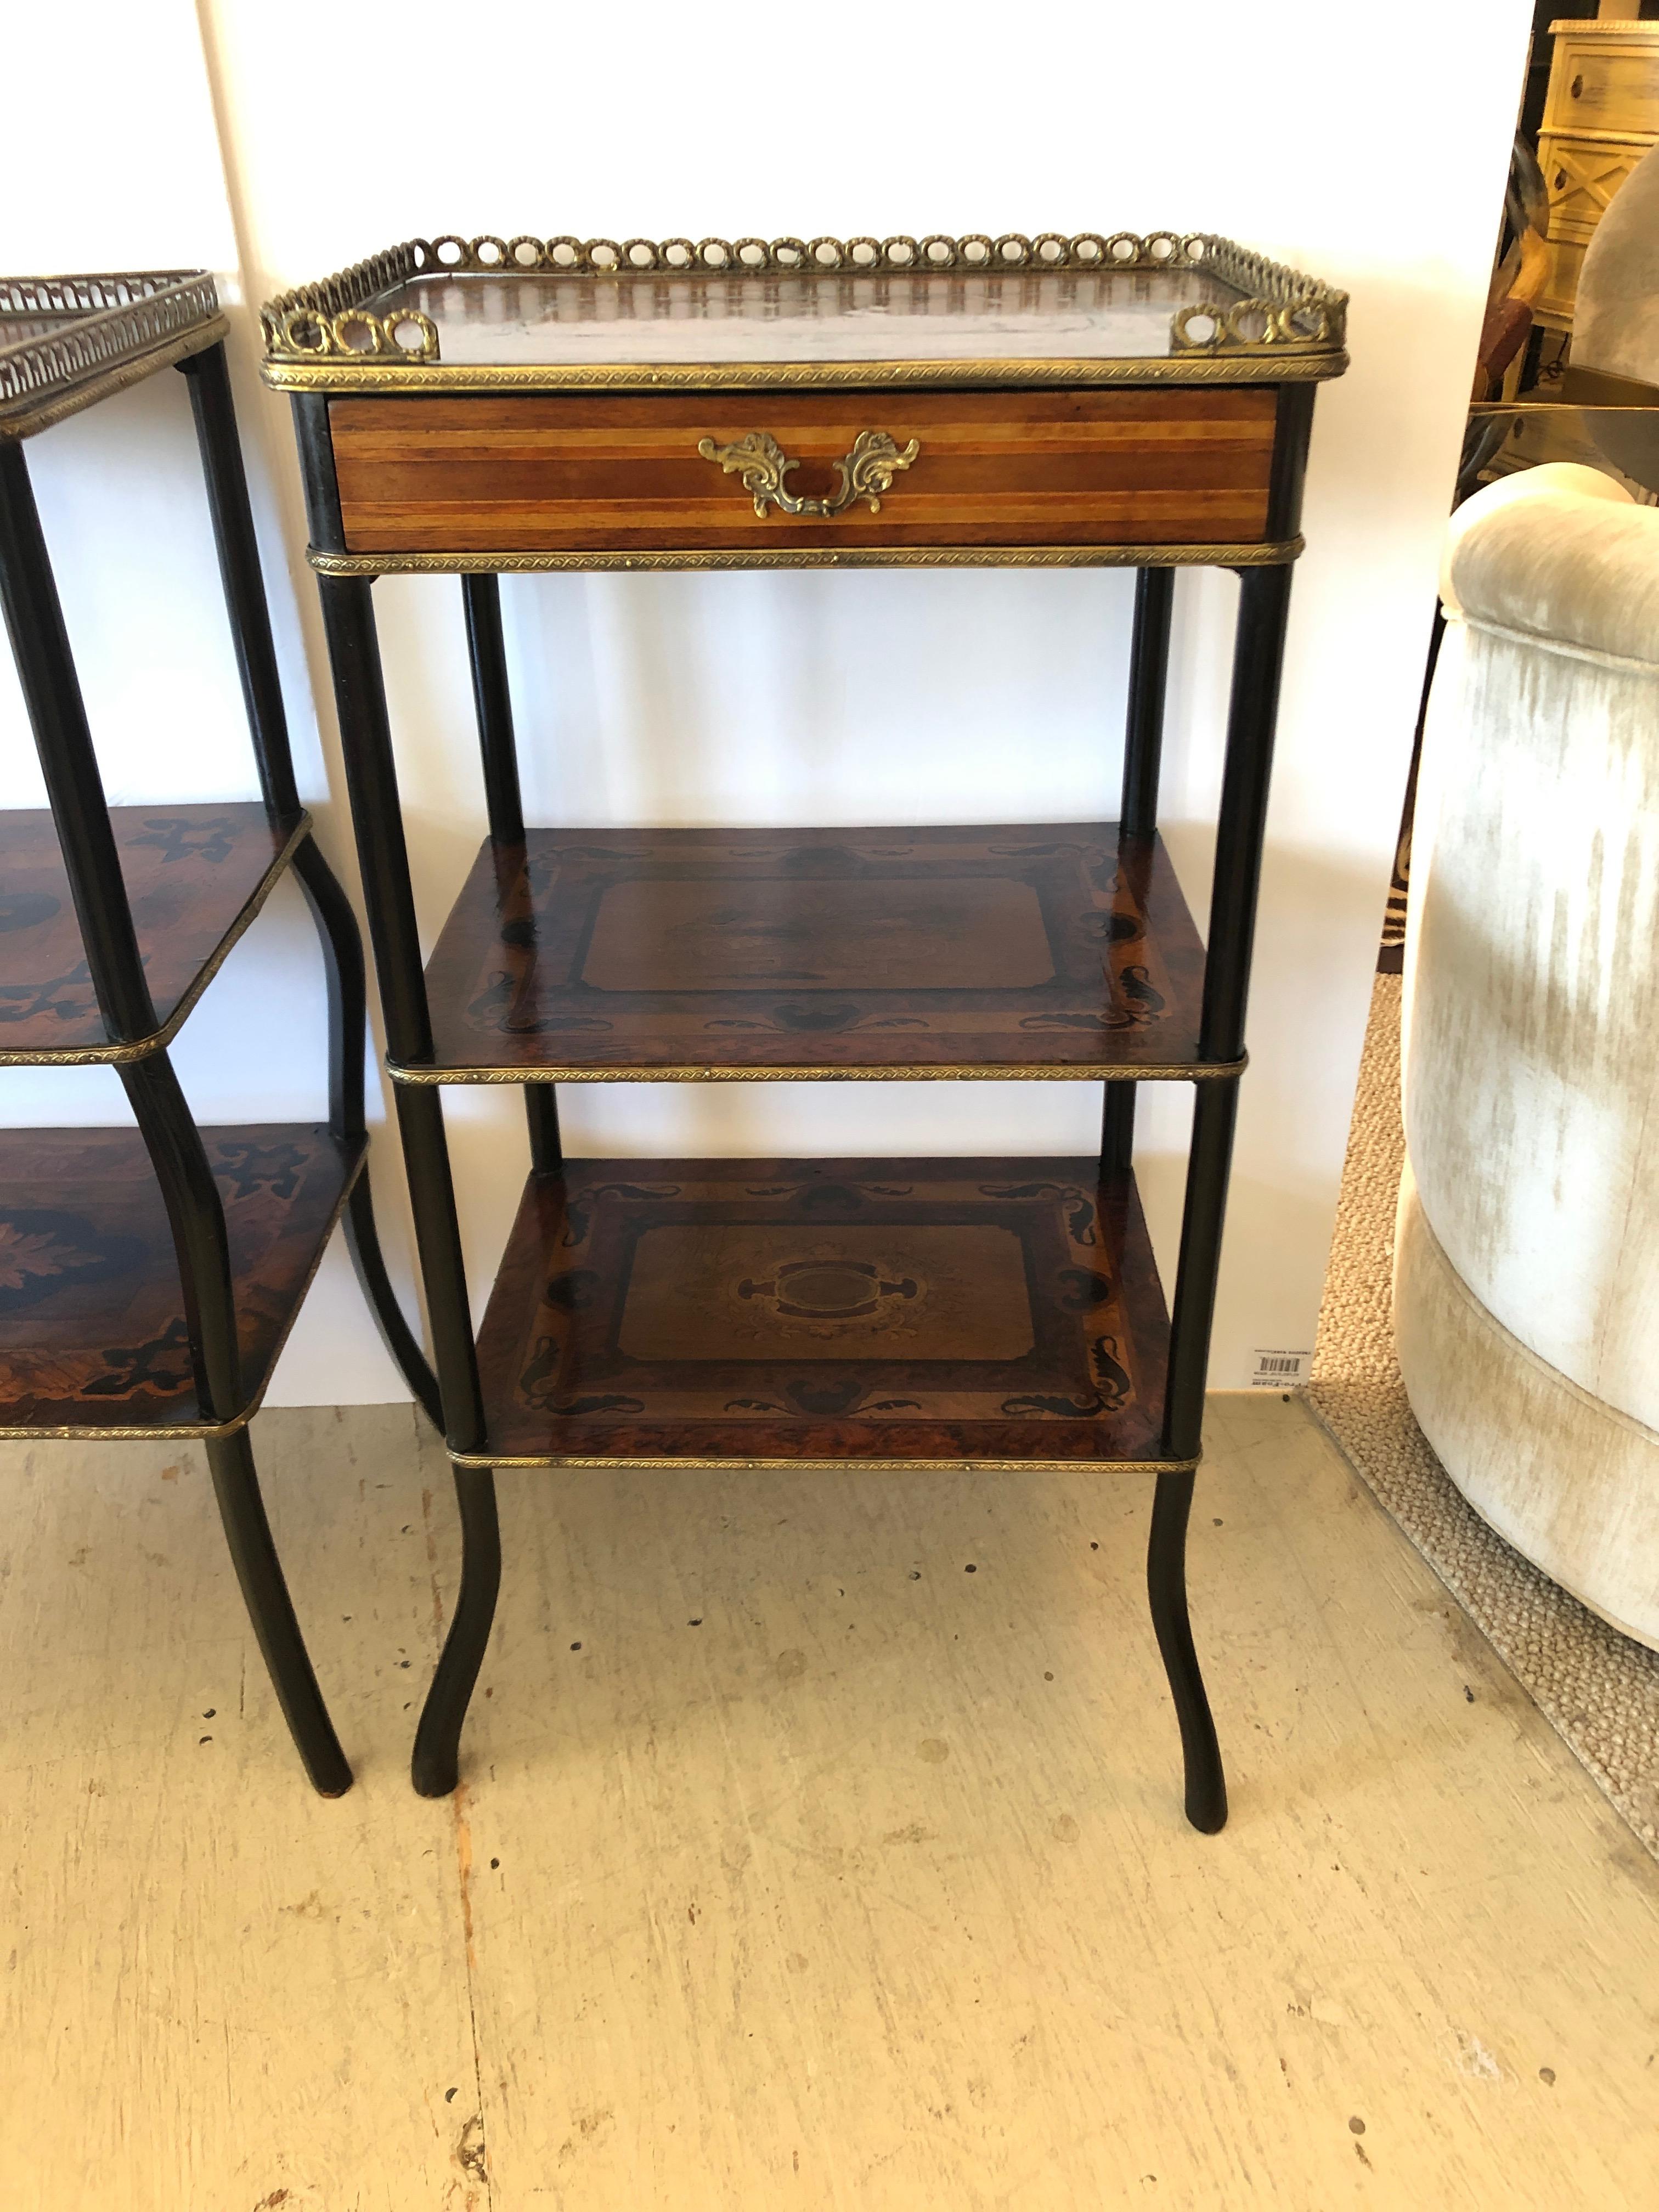 An extraordinary pair of 19th century 3-tier side tables that are even more visually interesting in their variations, they are not an exact match.
Each has intricate mahogany, satinwood, ebony and burl wood inlay, bronze galleries and bronze frames